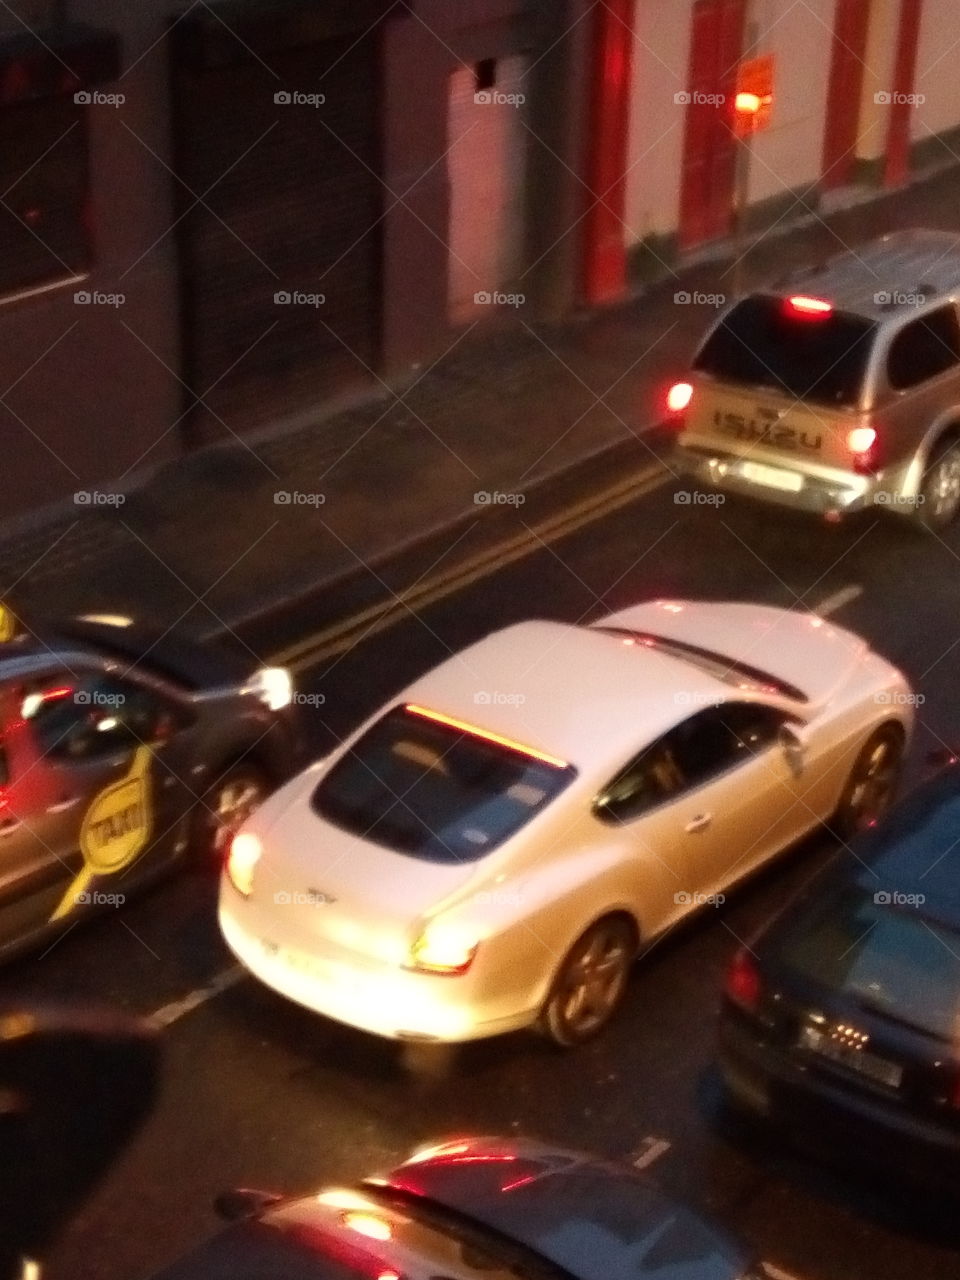 seen this beautiful Bentley pass by my window once again I love cars but don't have 320k for one lol